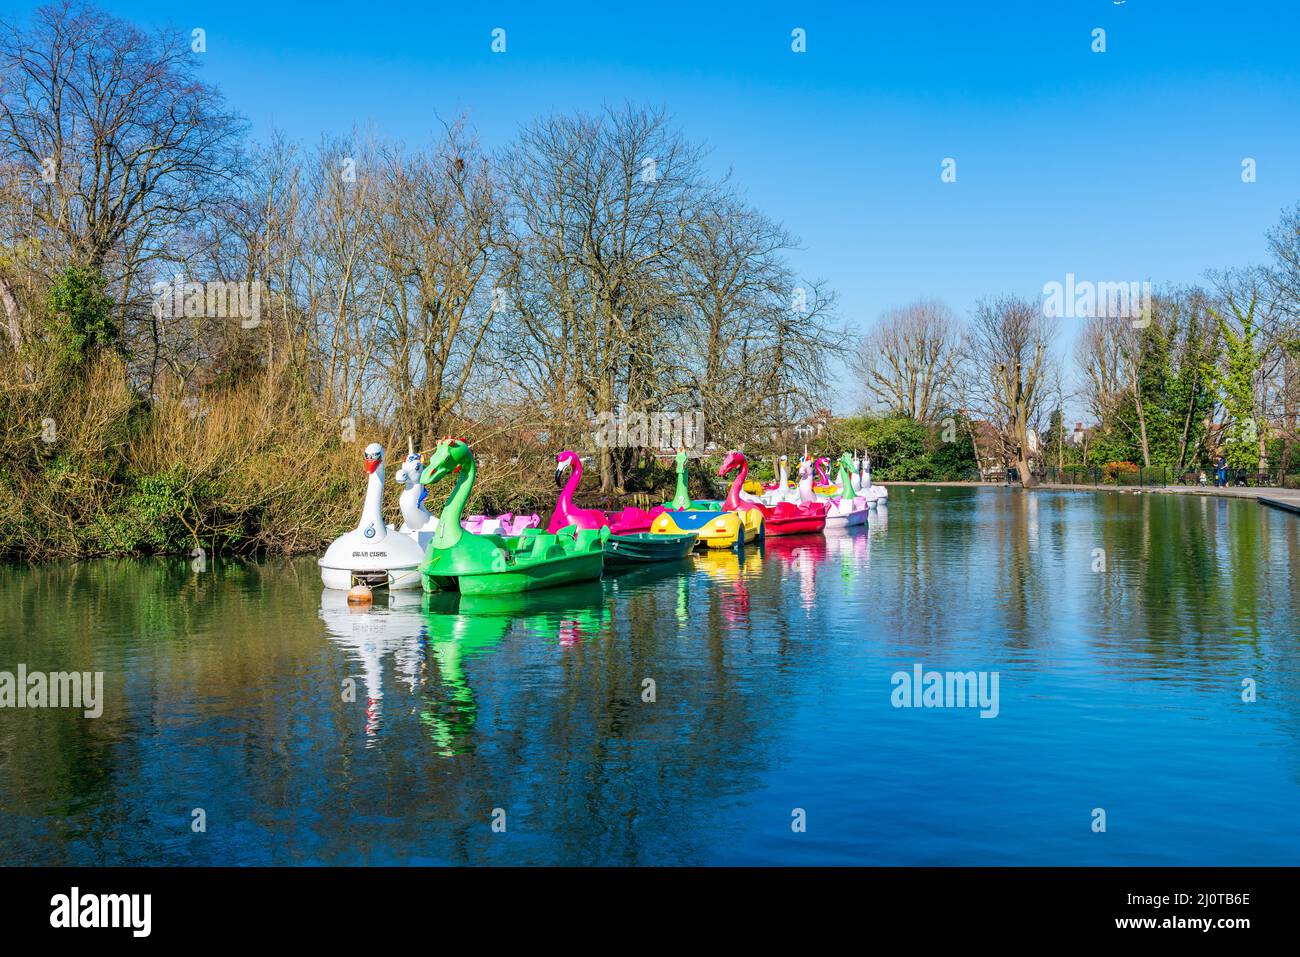 LONDON, UK - MARCH 19, 2022: View of boating lake with pedal boats on at Alexandra Palace in London Stock Photo